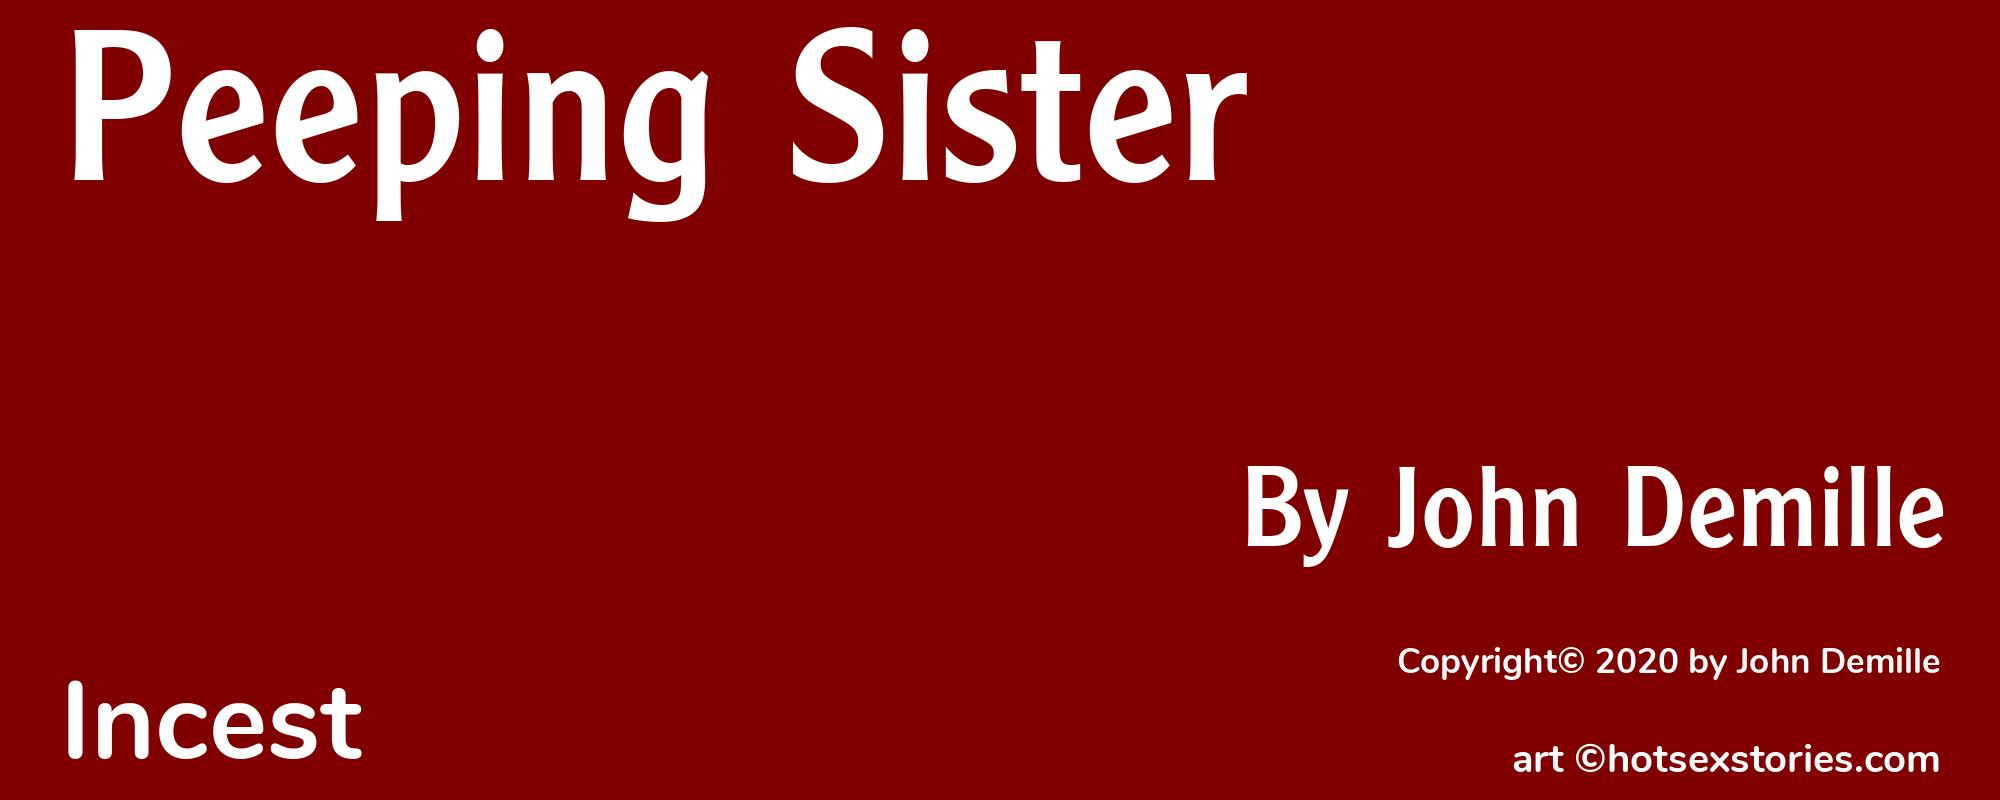 Peeping Sister - Cover